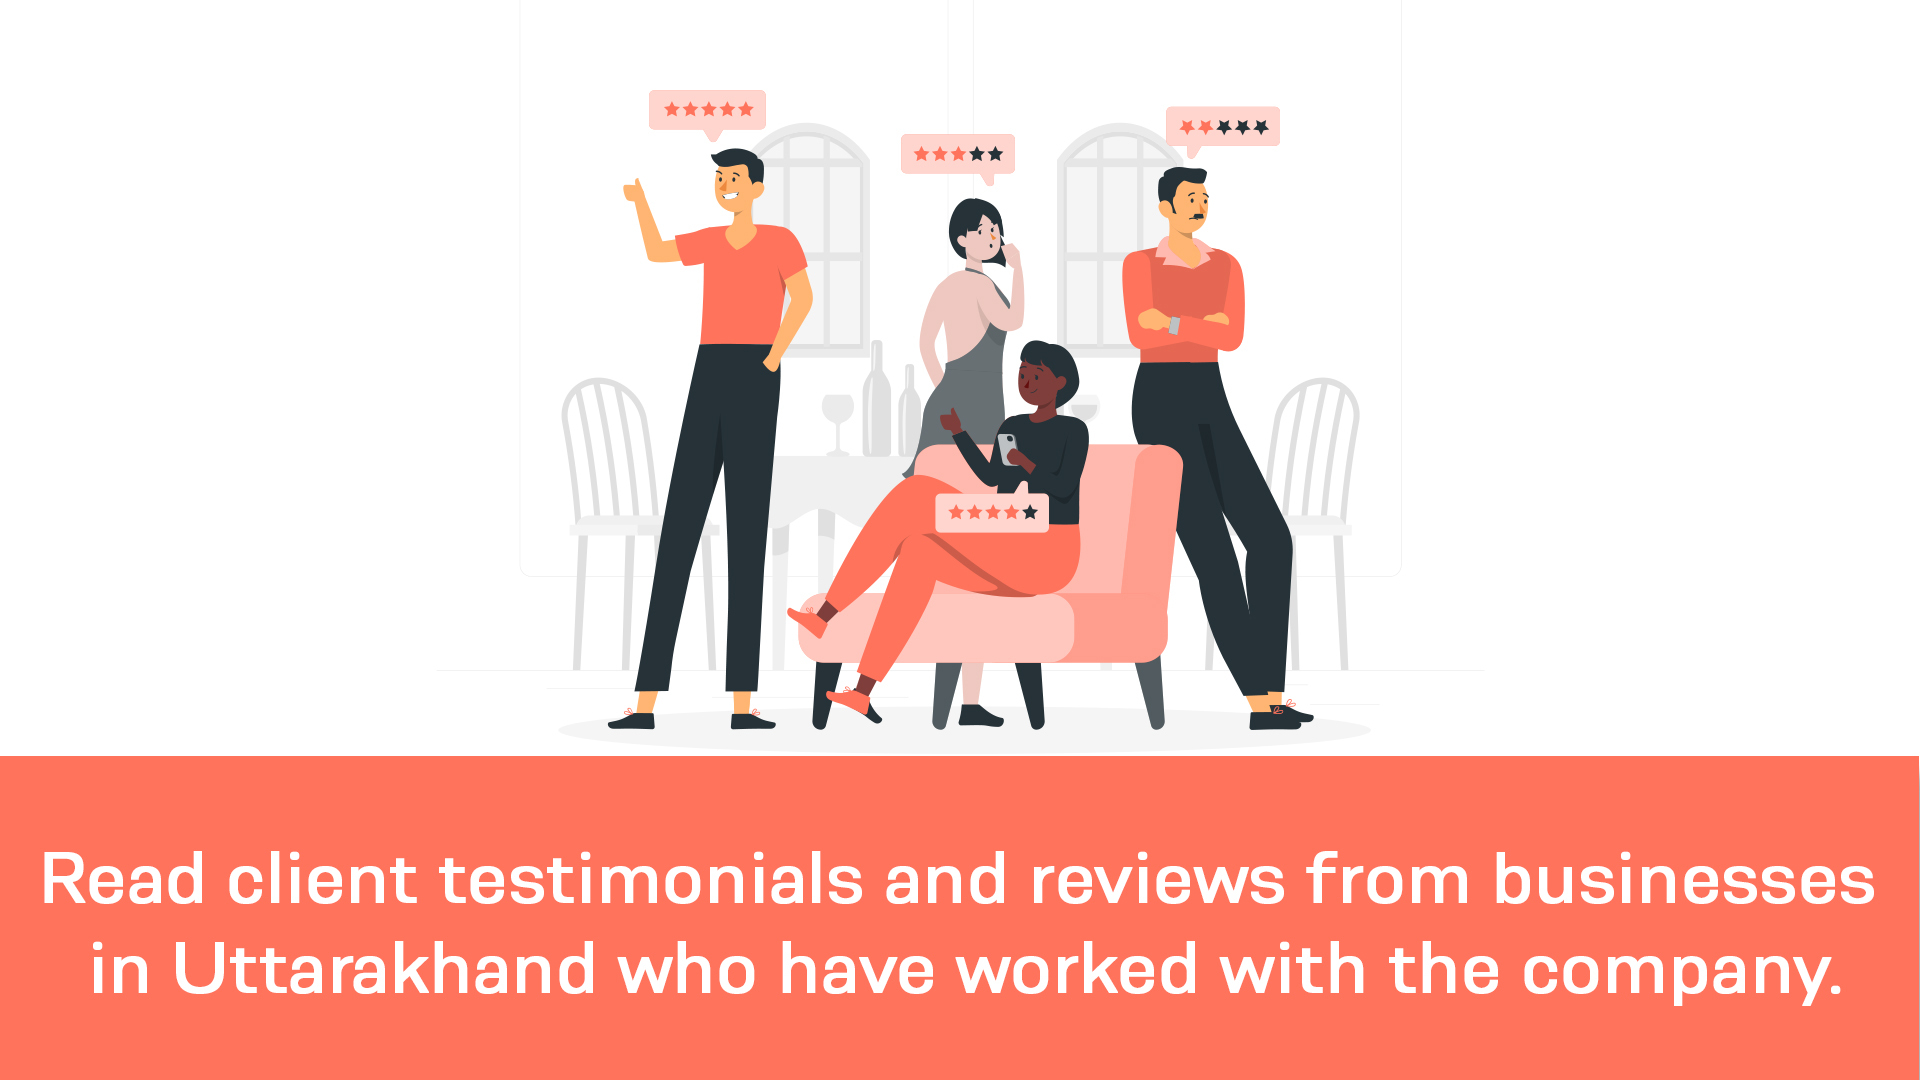 Read client testimonials and reviews from businesses in Uttarakhand